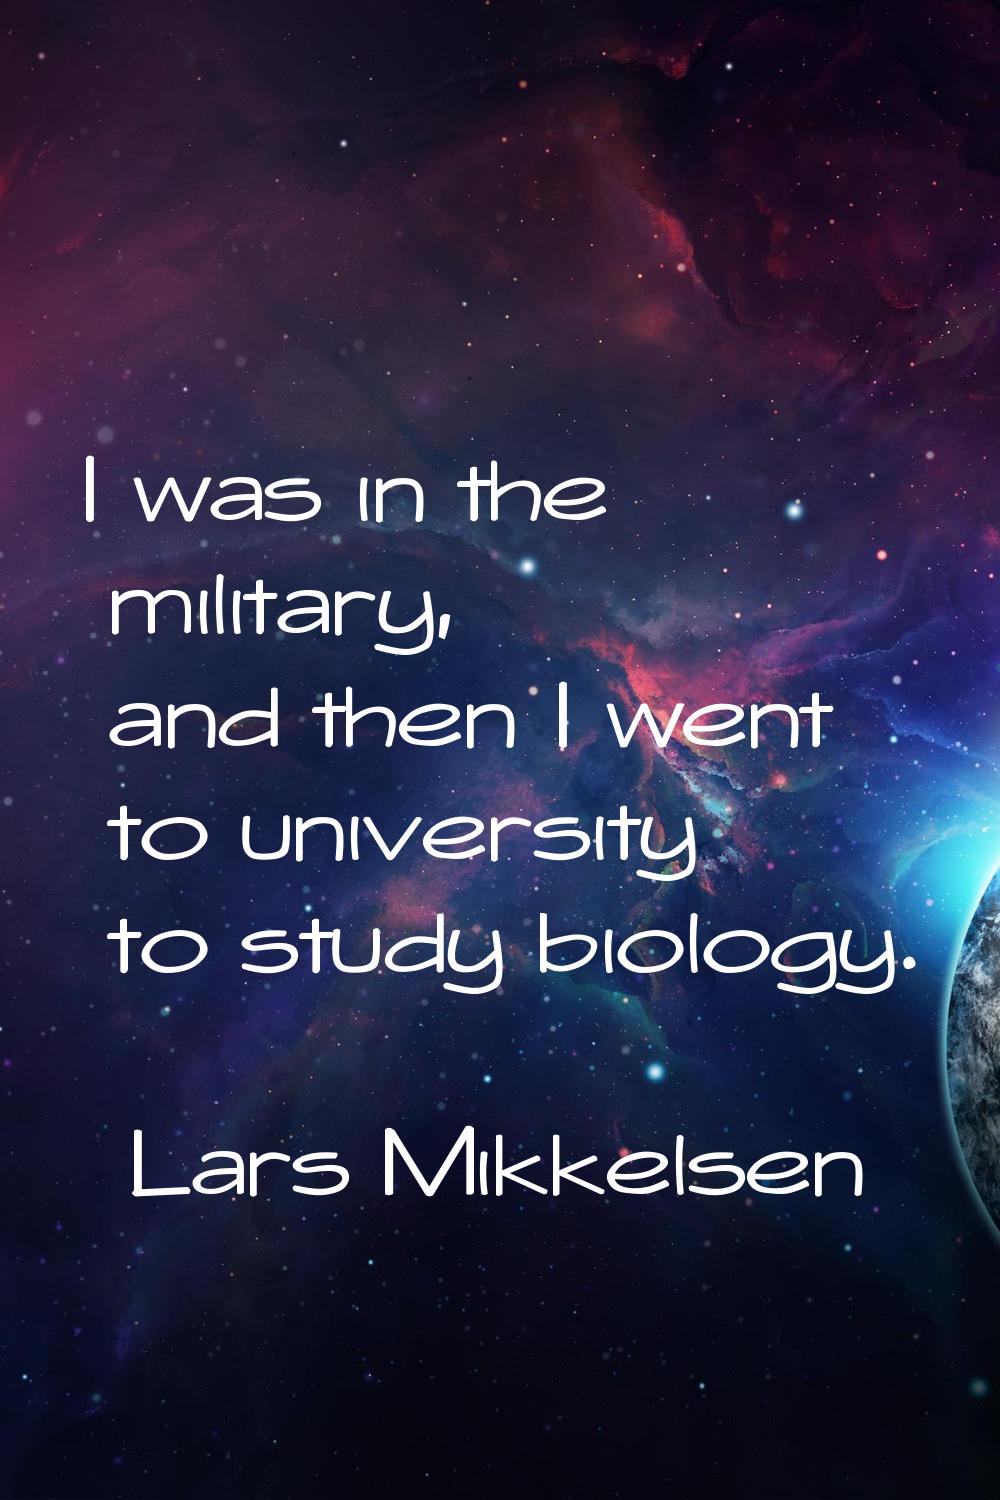 I was in the military, and then I went to university to study biology.